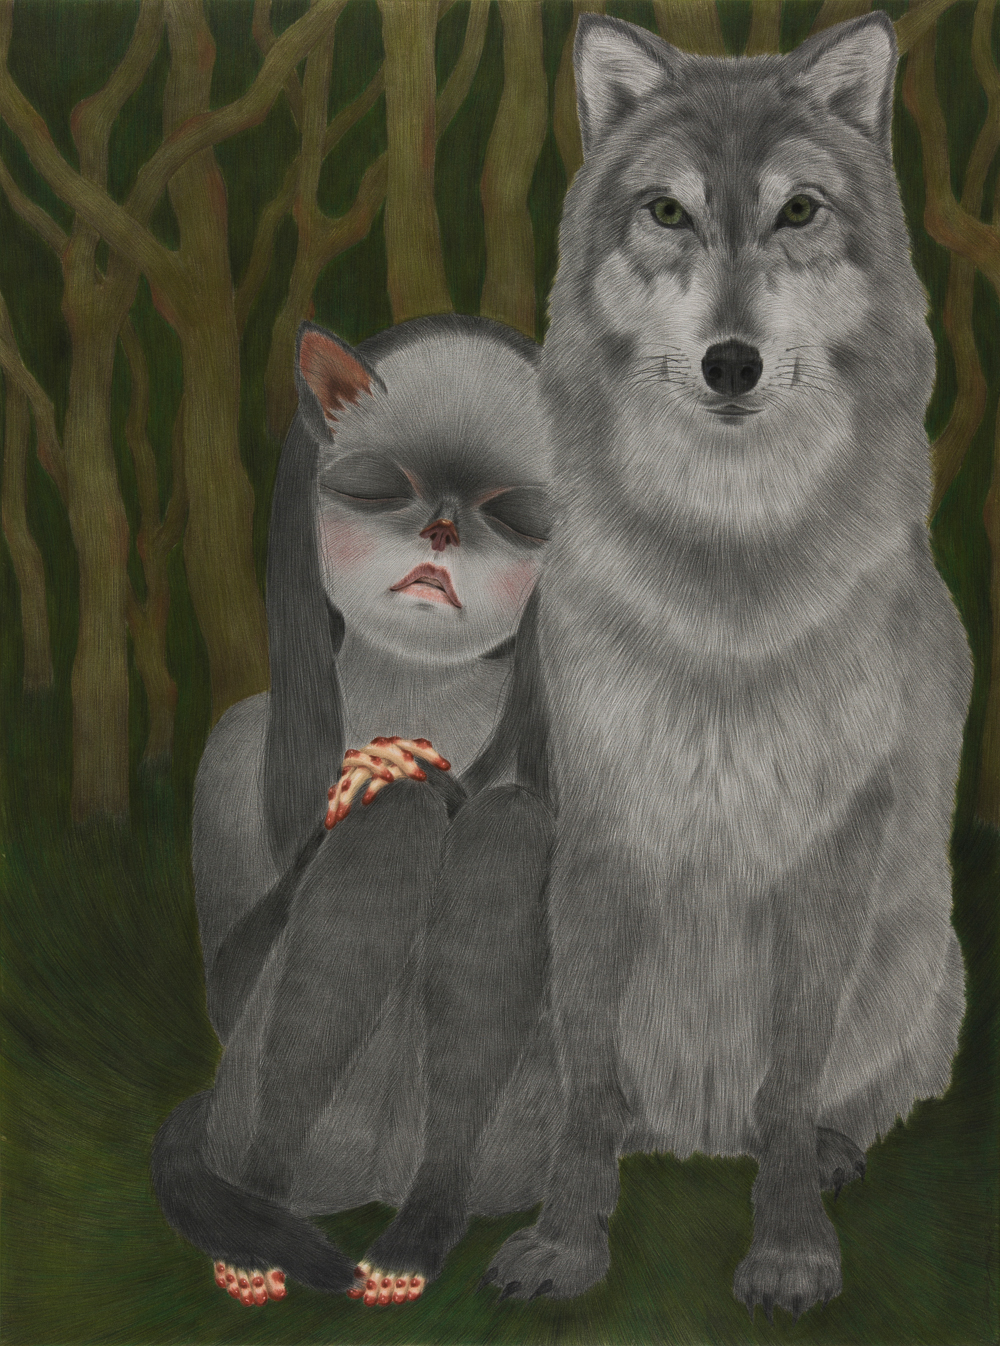 [13p1709] the wolf and an old child_conte on daimaru_130.3×97_2013.jpg